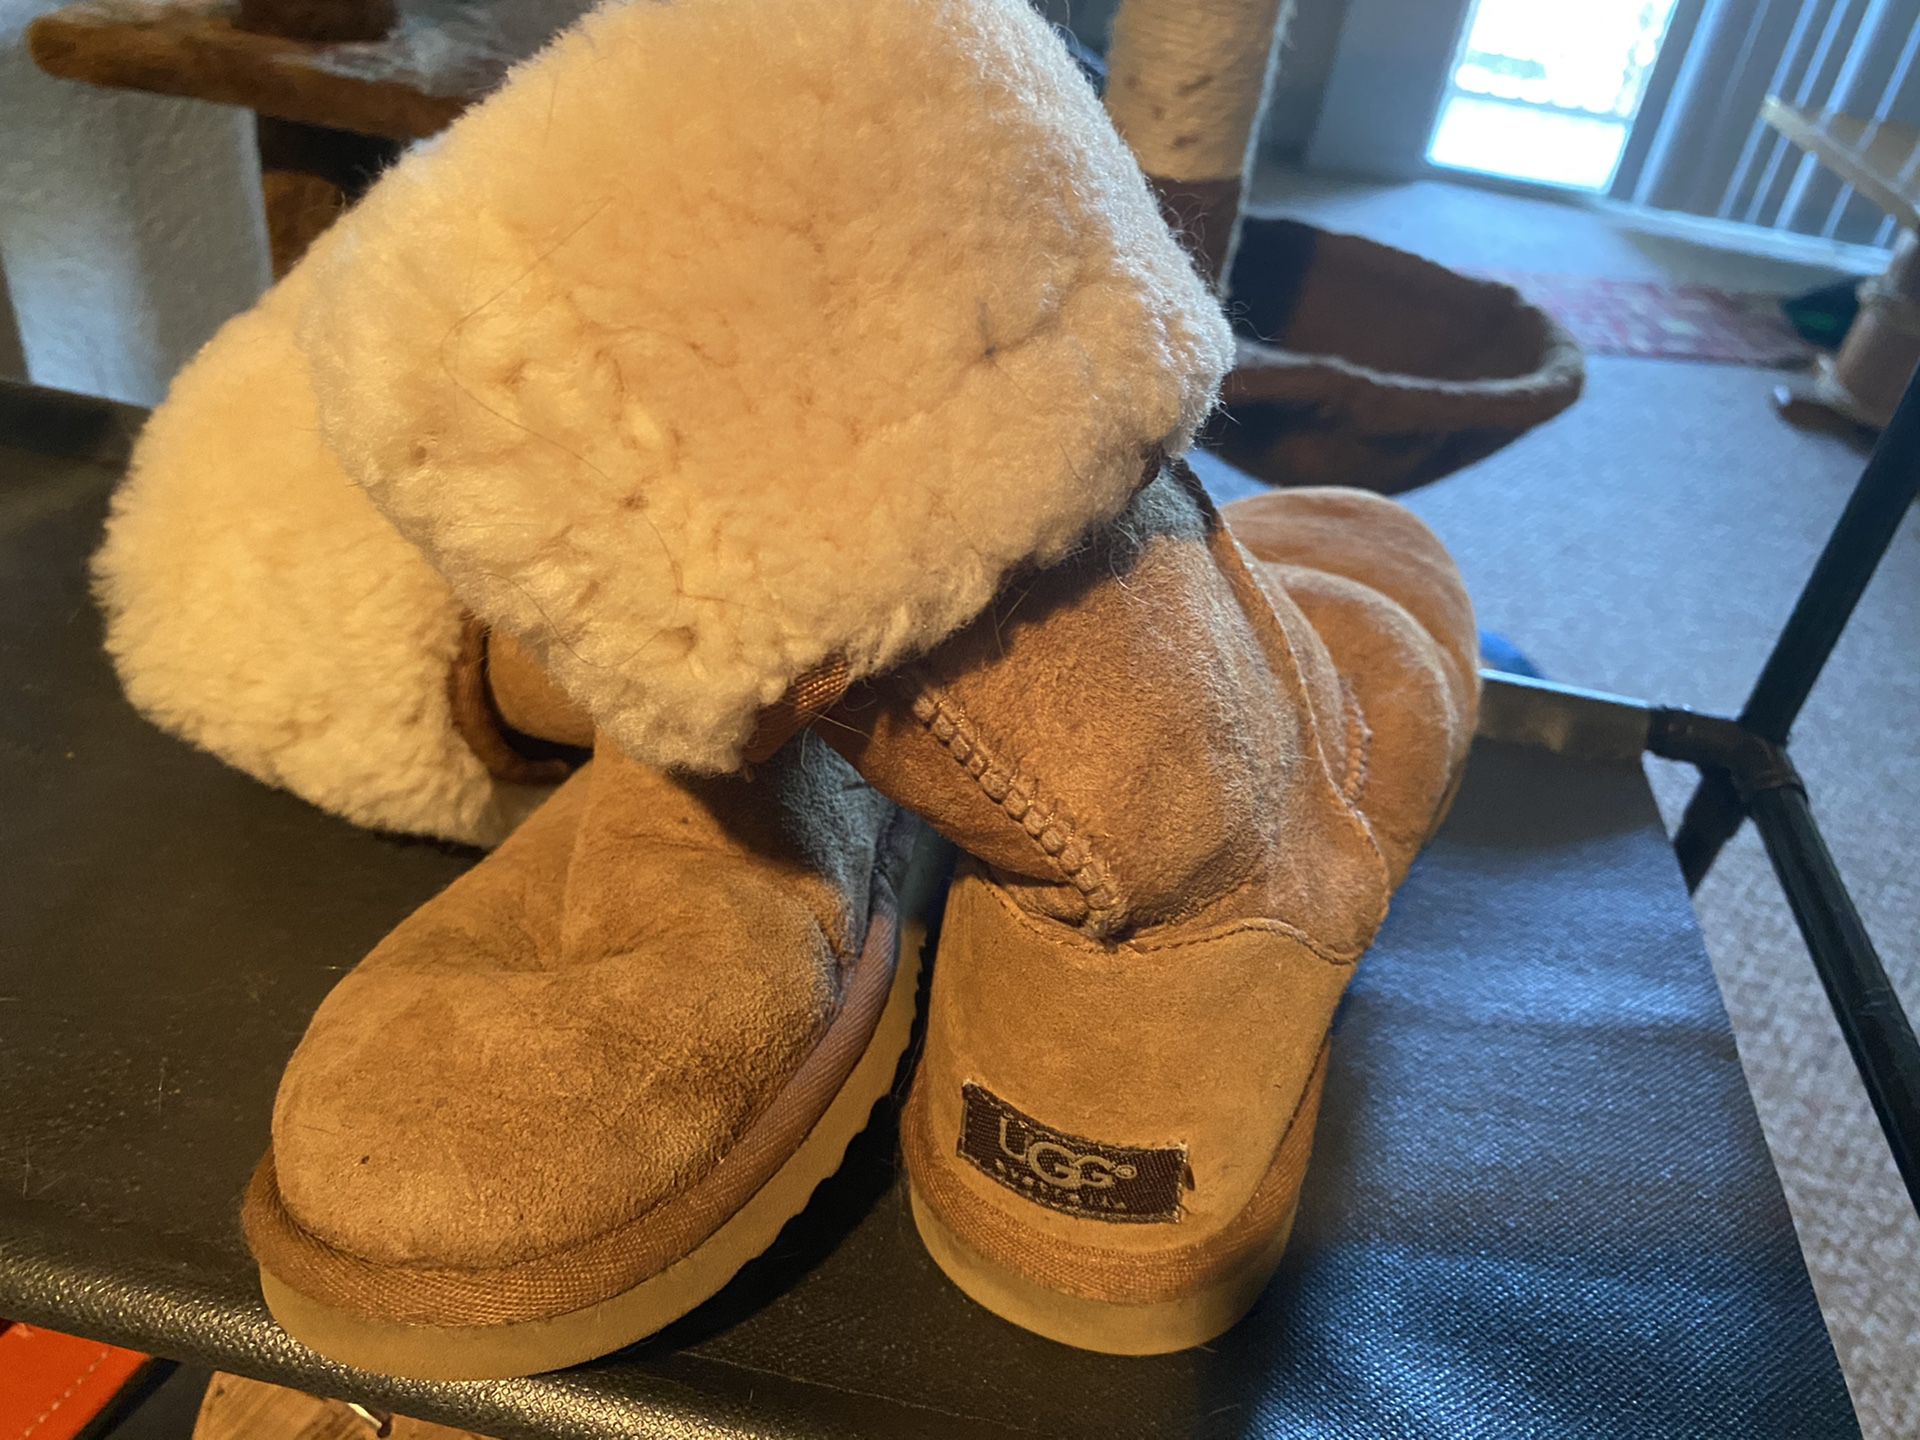 Uggs boots, women’s size 6 - $50